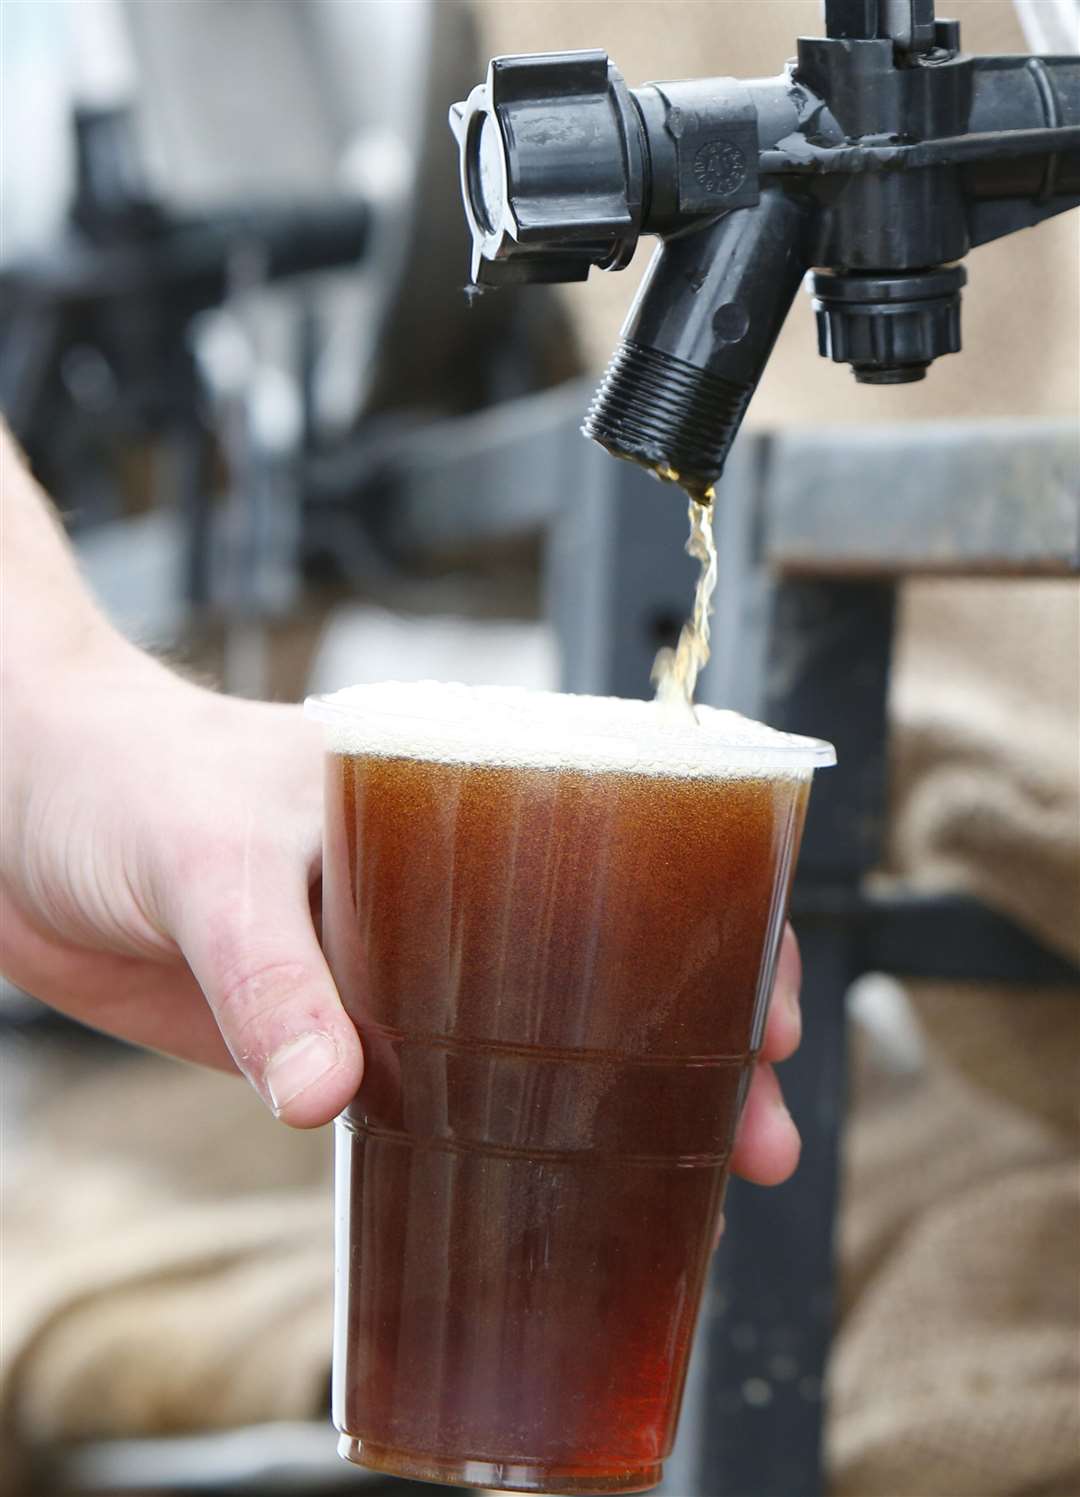 There will be plenty of beverages to enjoy at Oktoberfest